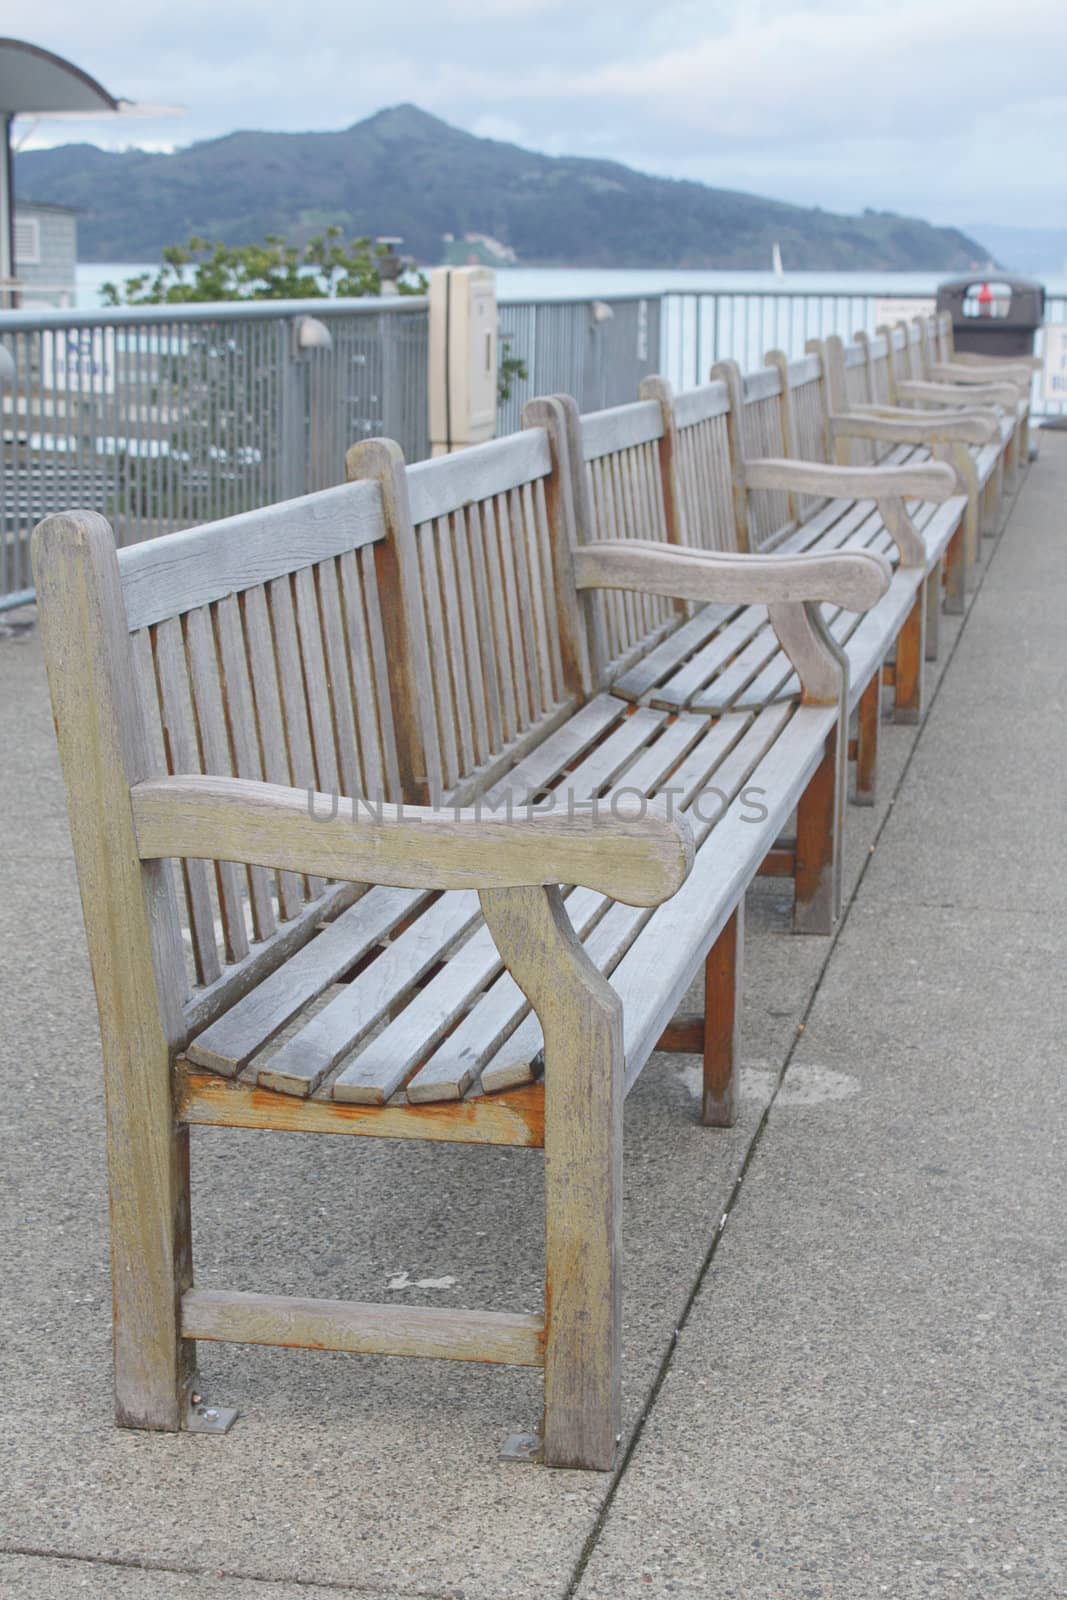 Row of wooden benches on wharf by pulen